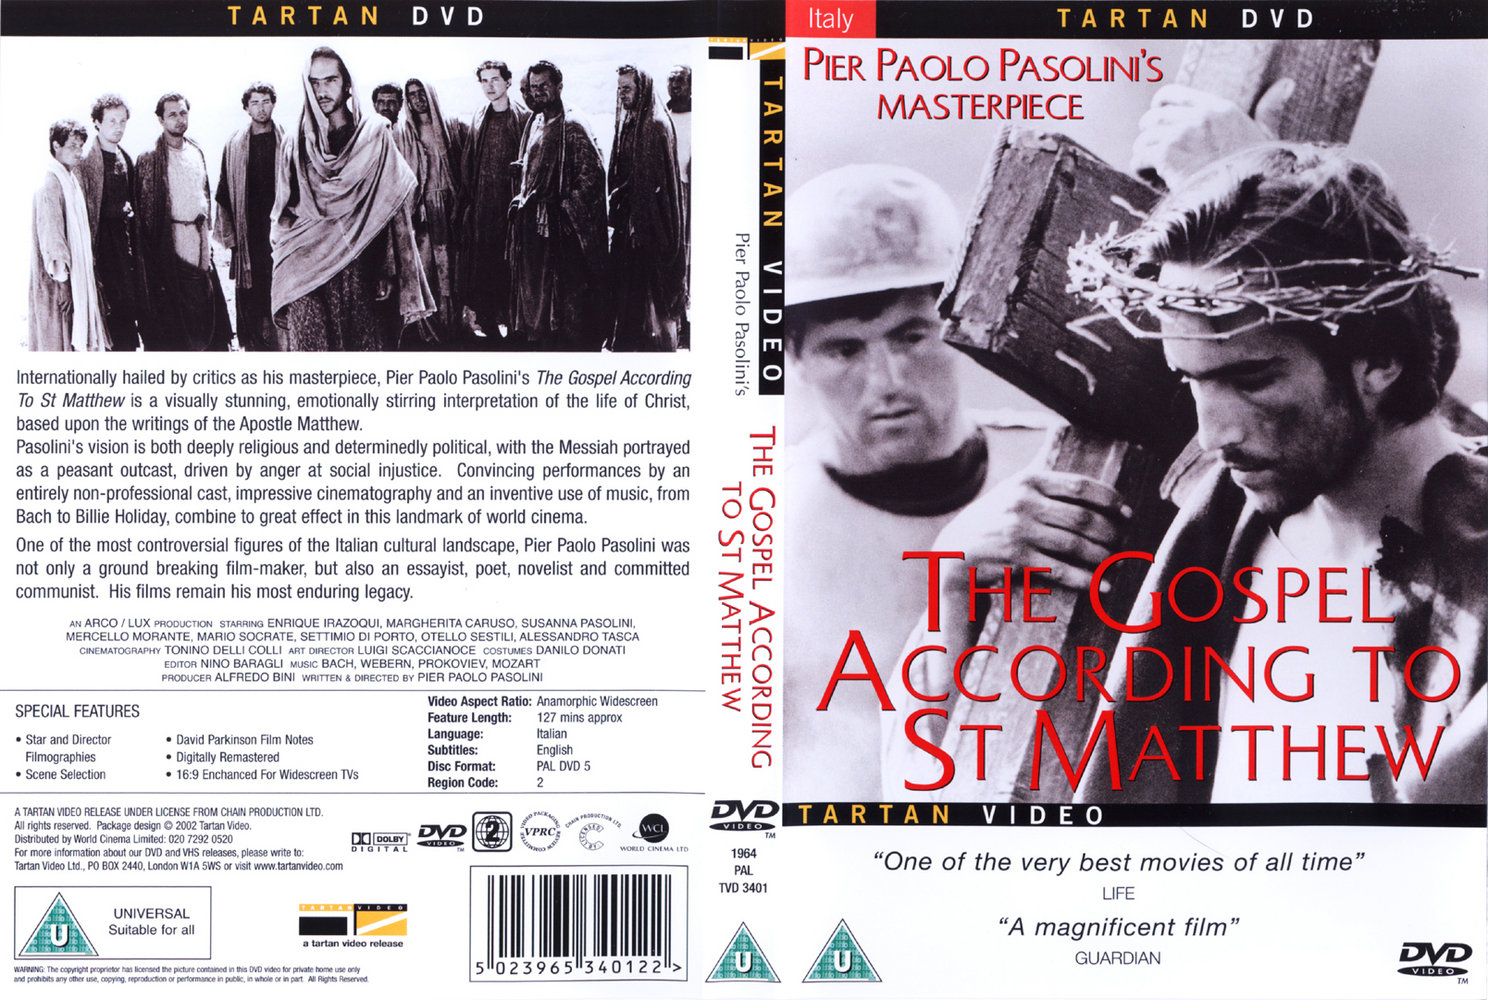 The Gospel According To St Matthew Pier Paolo Pasolini 1964 British Dvd Tartan Video Free Download Borrow And Streaming Internet Archive Old testament quotations in matthew's gospel. the gospel according to st matthew